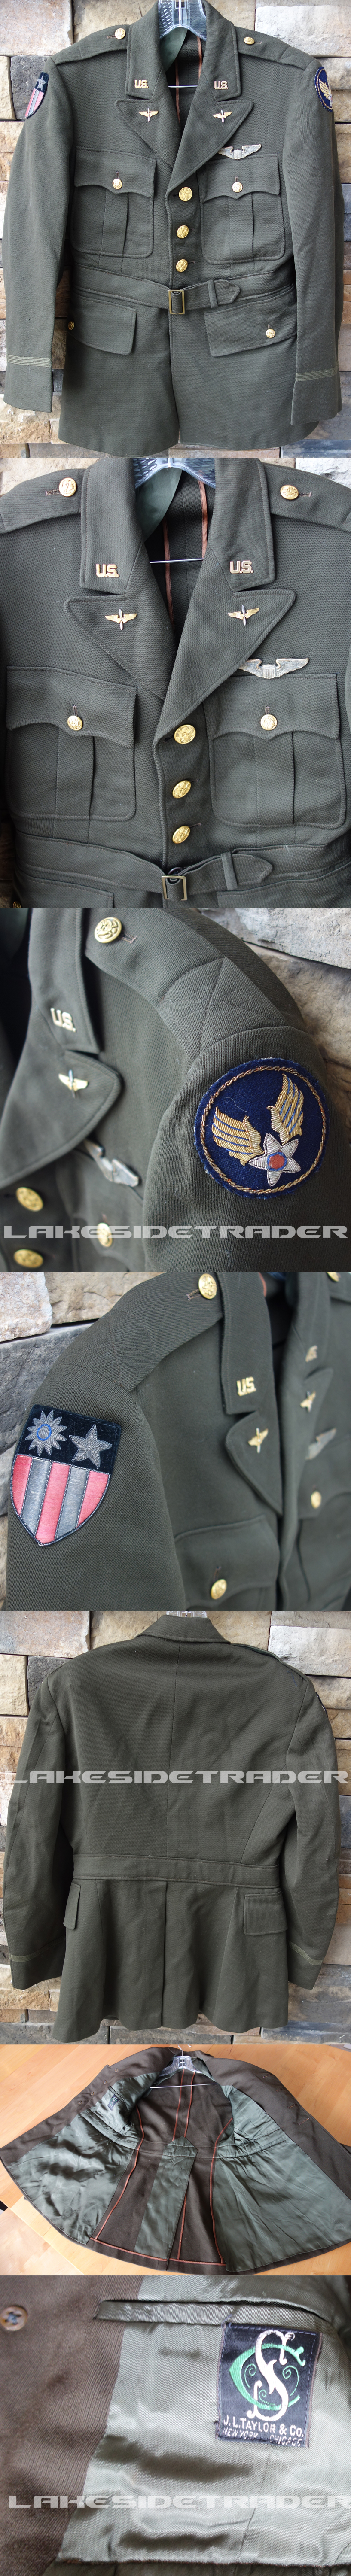 US Army/Airforce 100+ piece uniform and equipment grouping!